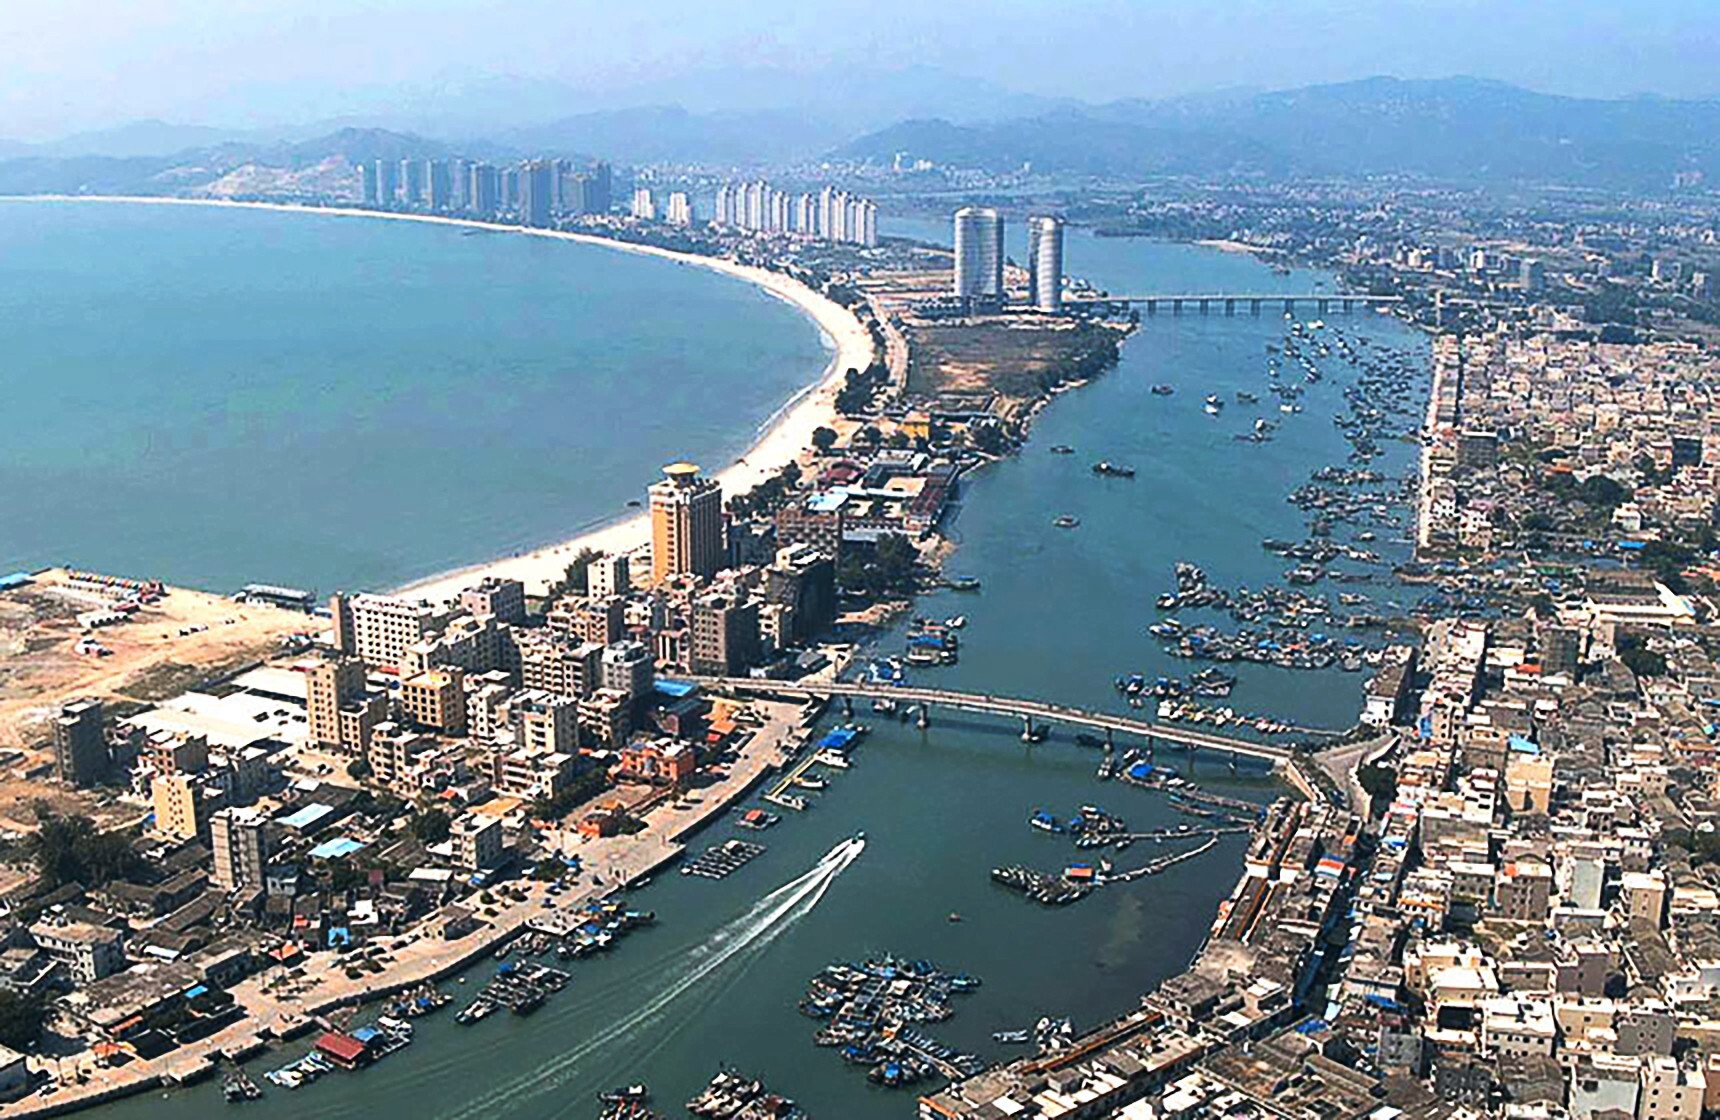 A coastal view of Huizhou in China’s southern province of Guangdong. The Greater Bay Area city is being pitched as a retirement destination for Hong Kong’s elderly citizens. Photo: SCMP Handout